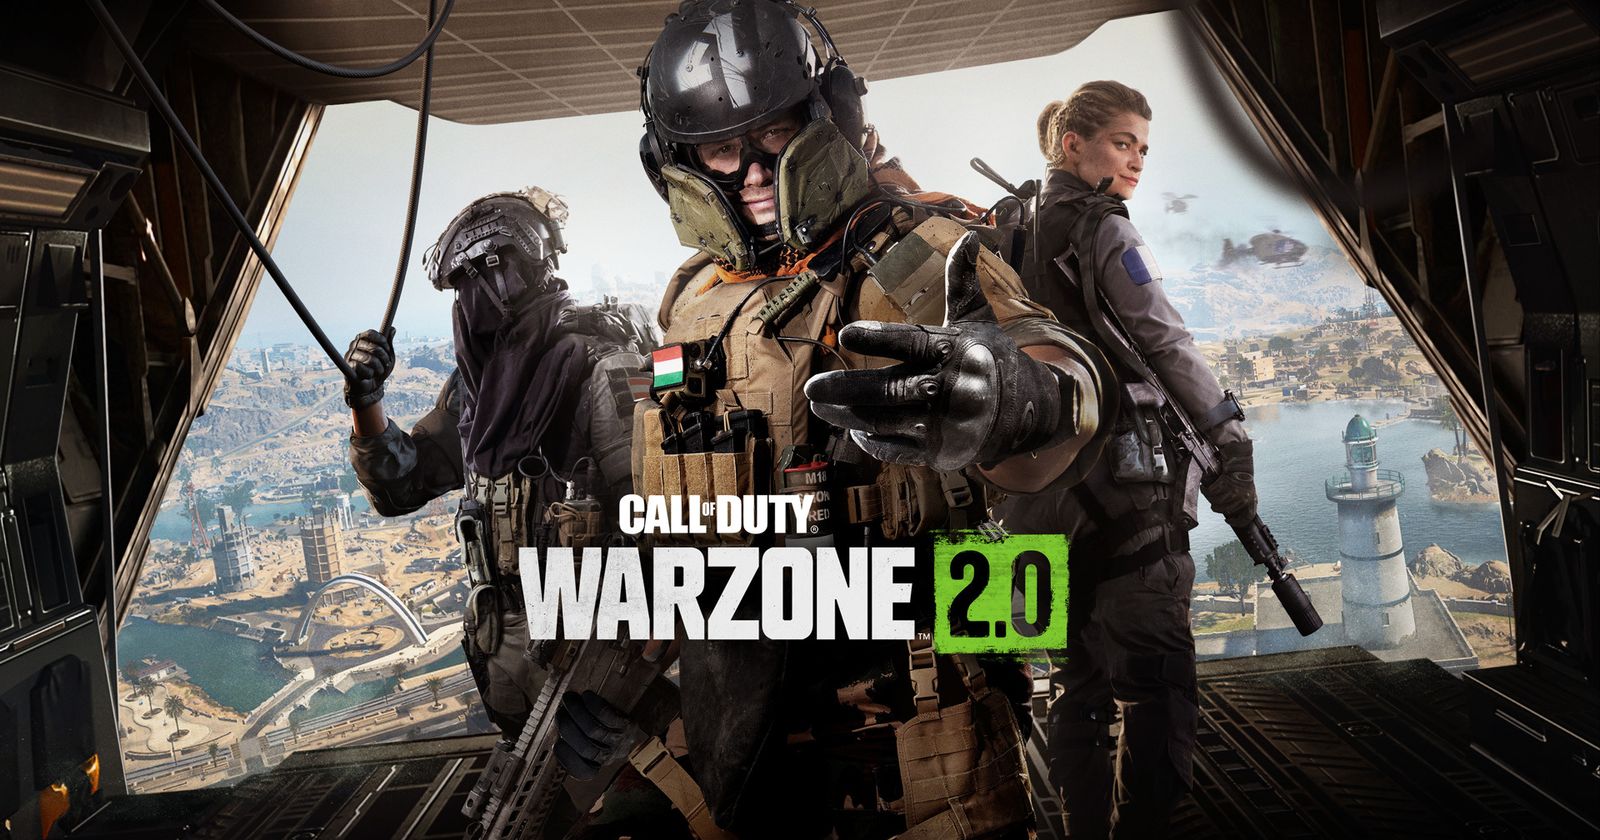 How To Download All Warzone 2 Content On Xbox - Guide